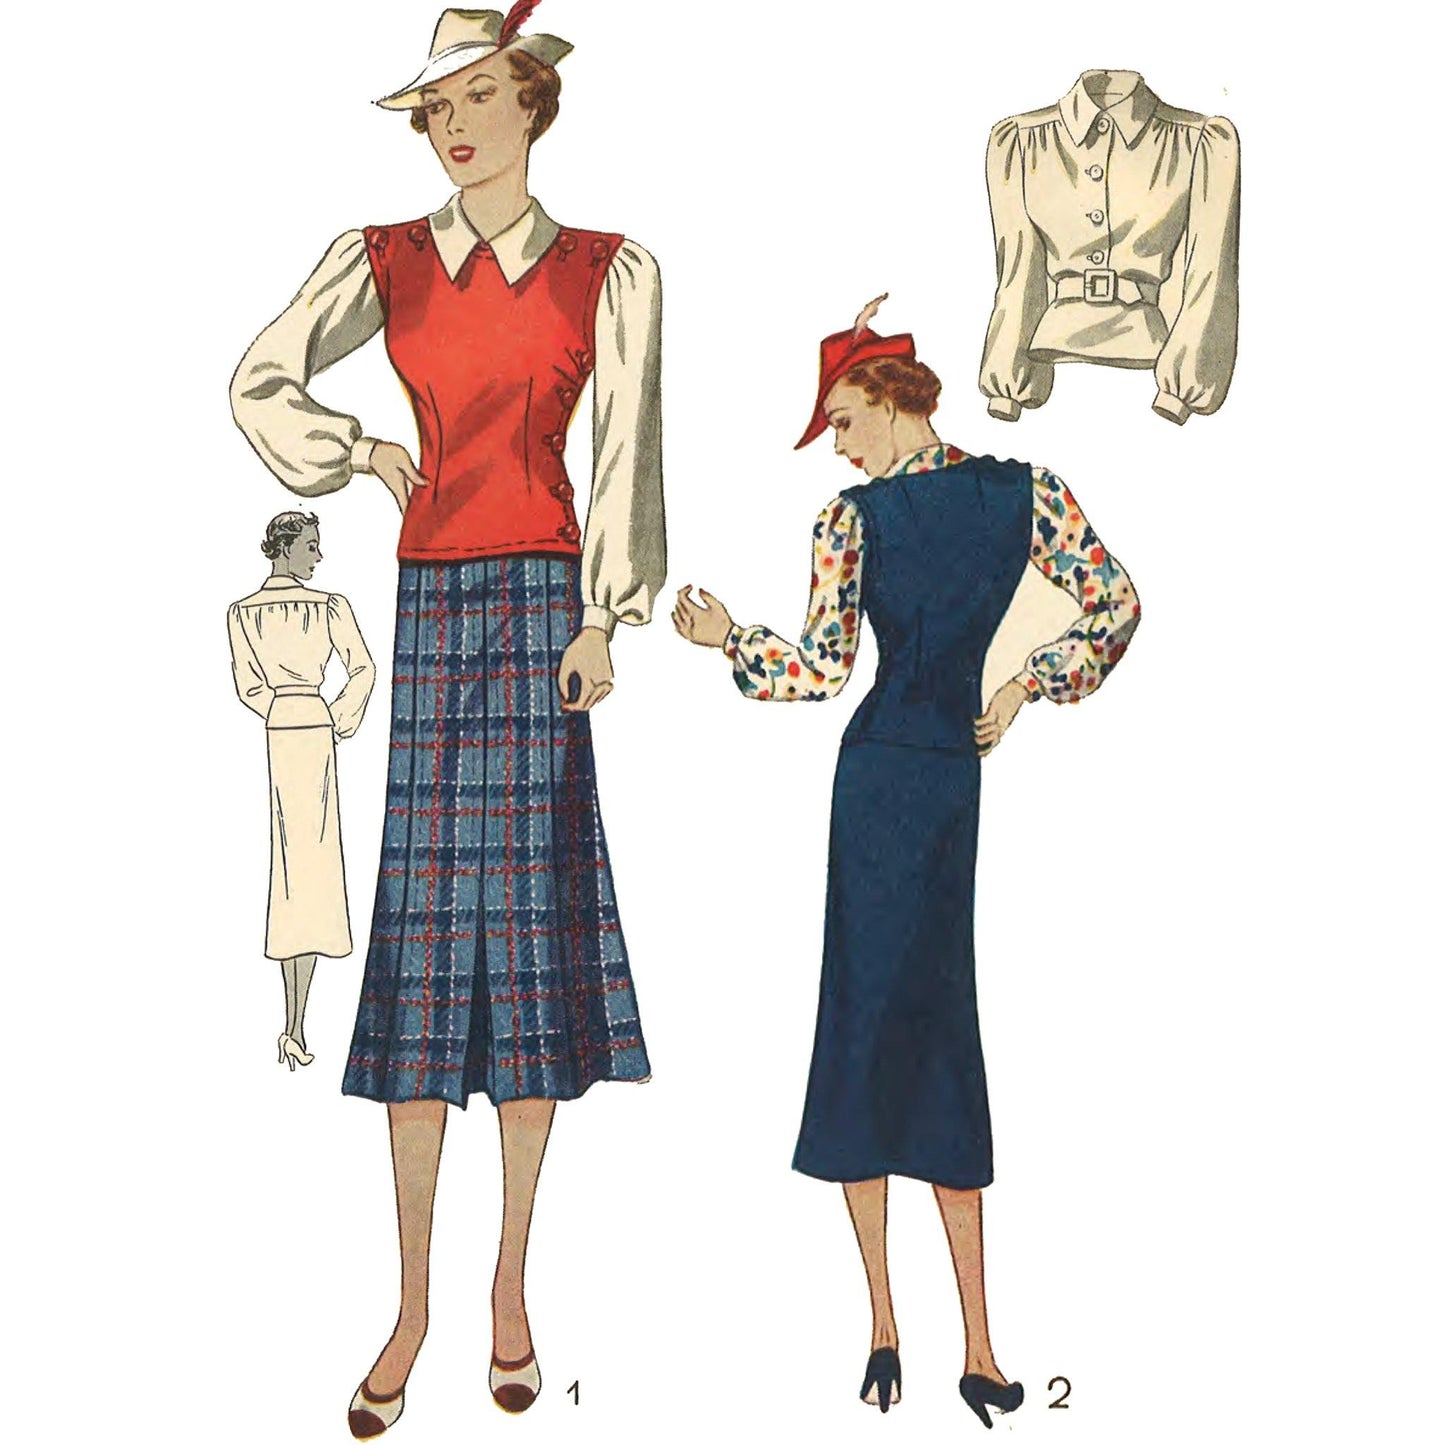 Women wearing blouses and skirts